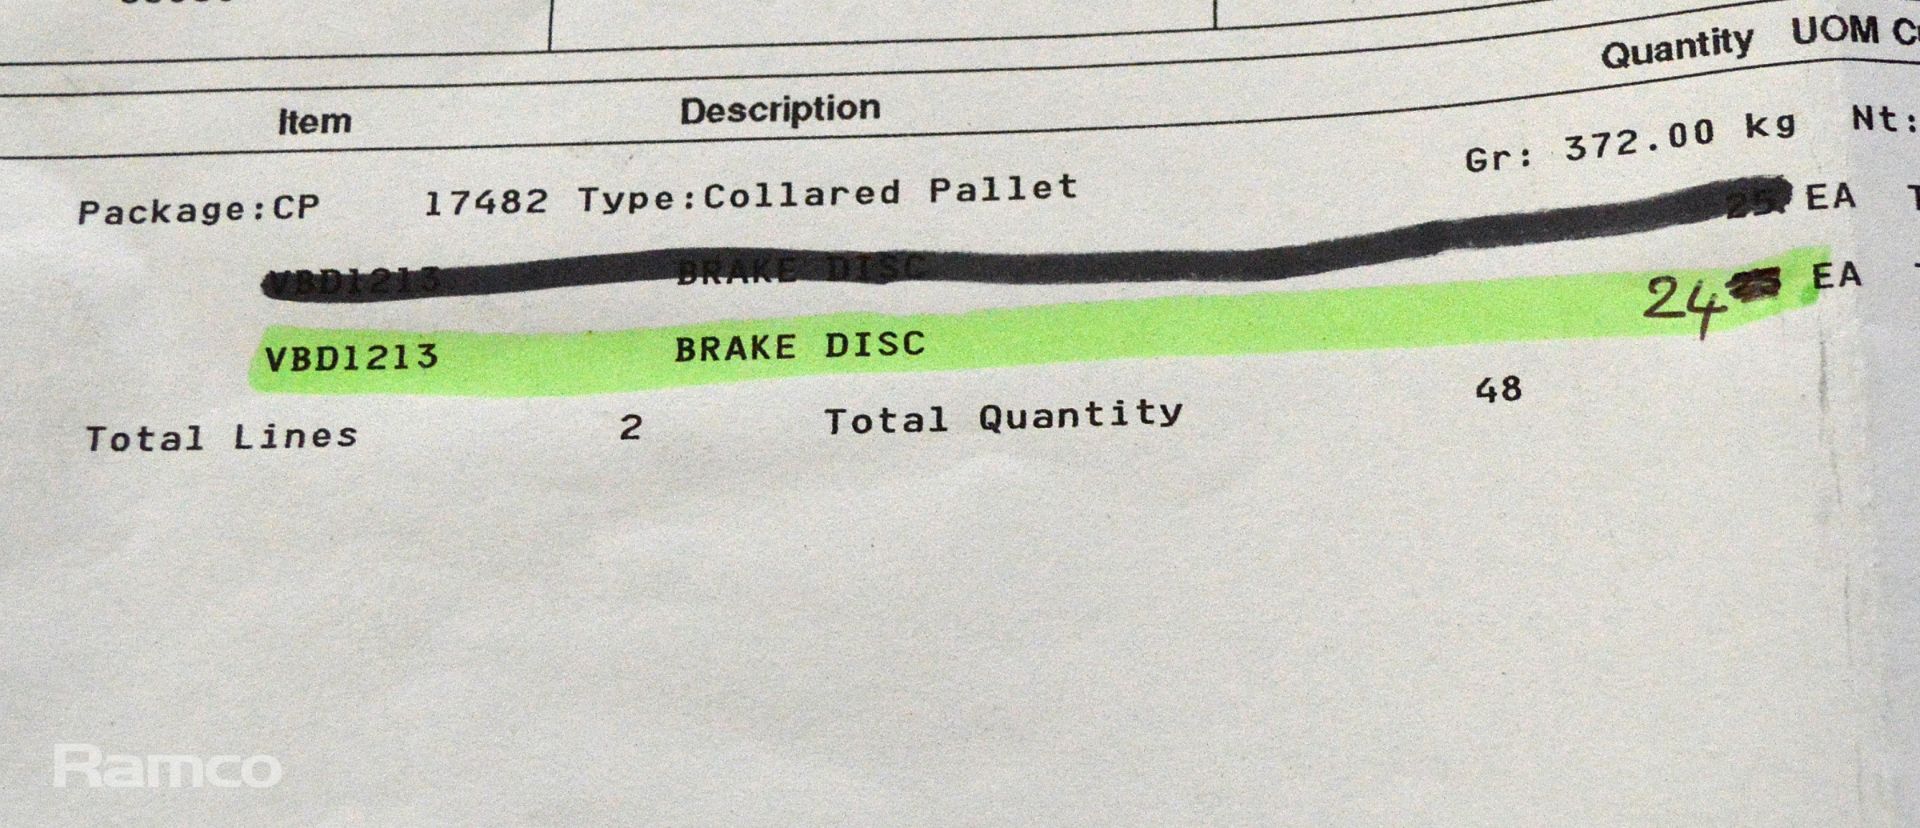 Vehicle parts - brake discs - see picture for itinerary for model numbers and quantities - - Image 4 of 4